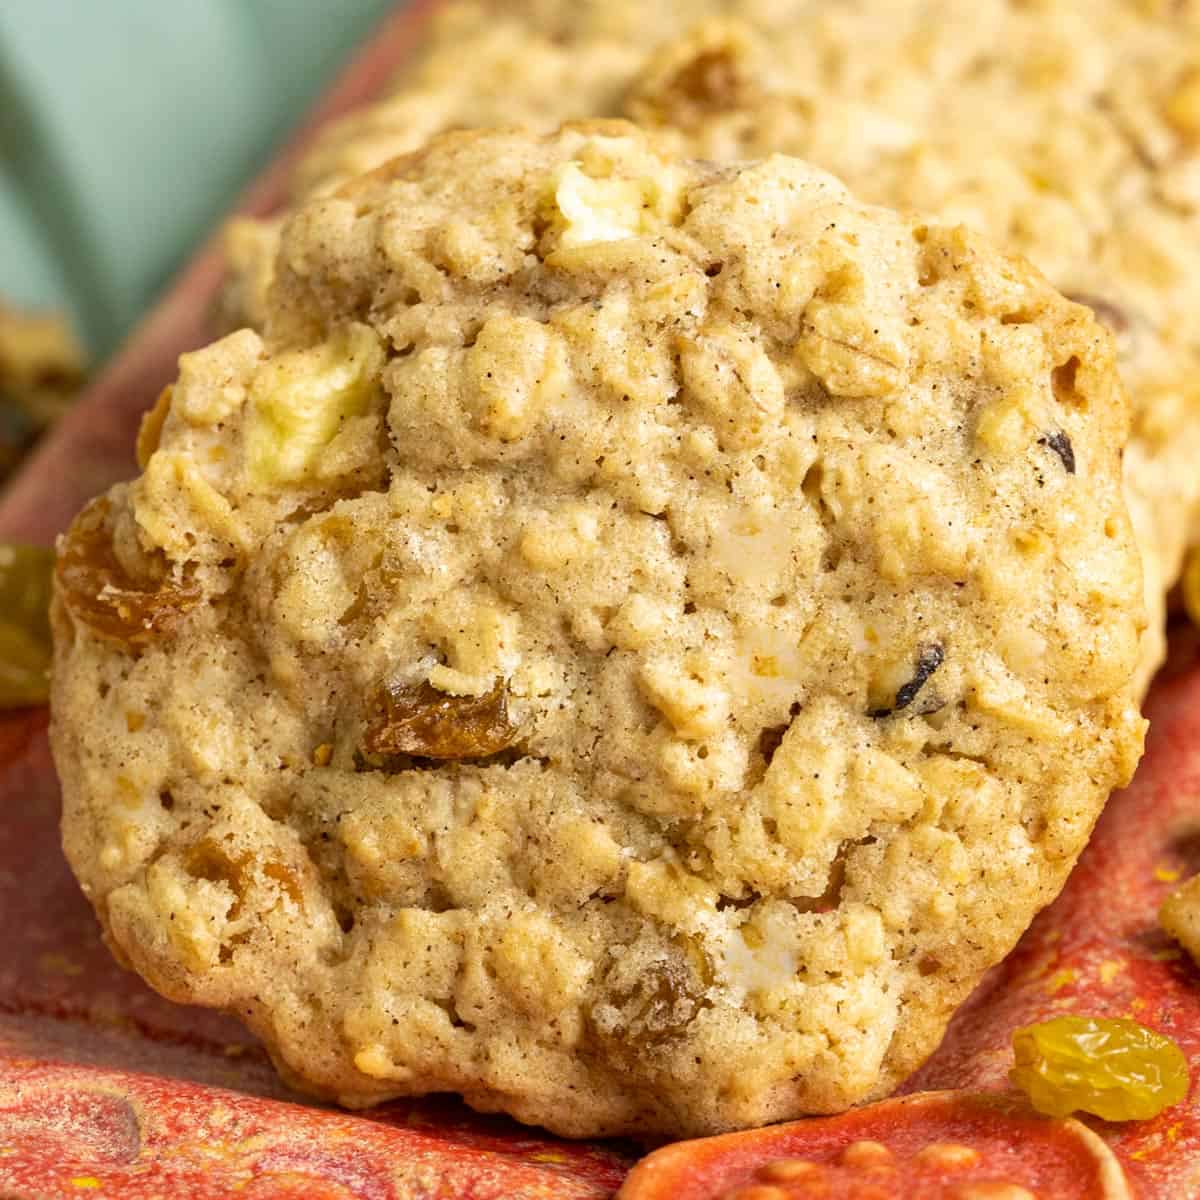 Close up of a single apple raisin walnut oatmeal cookie on a red dish.